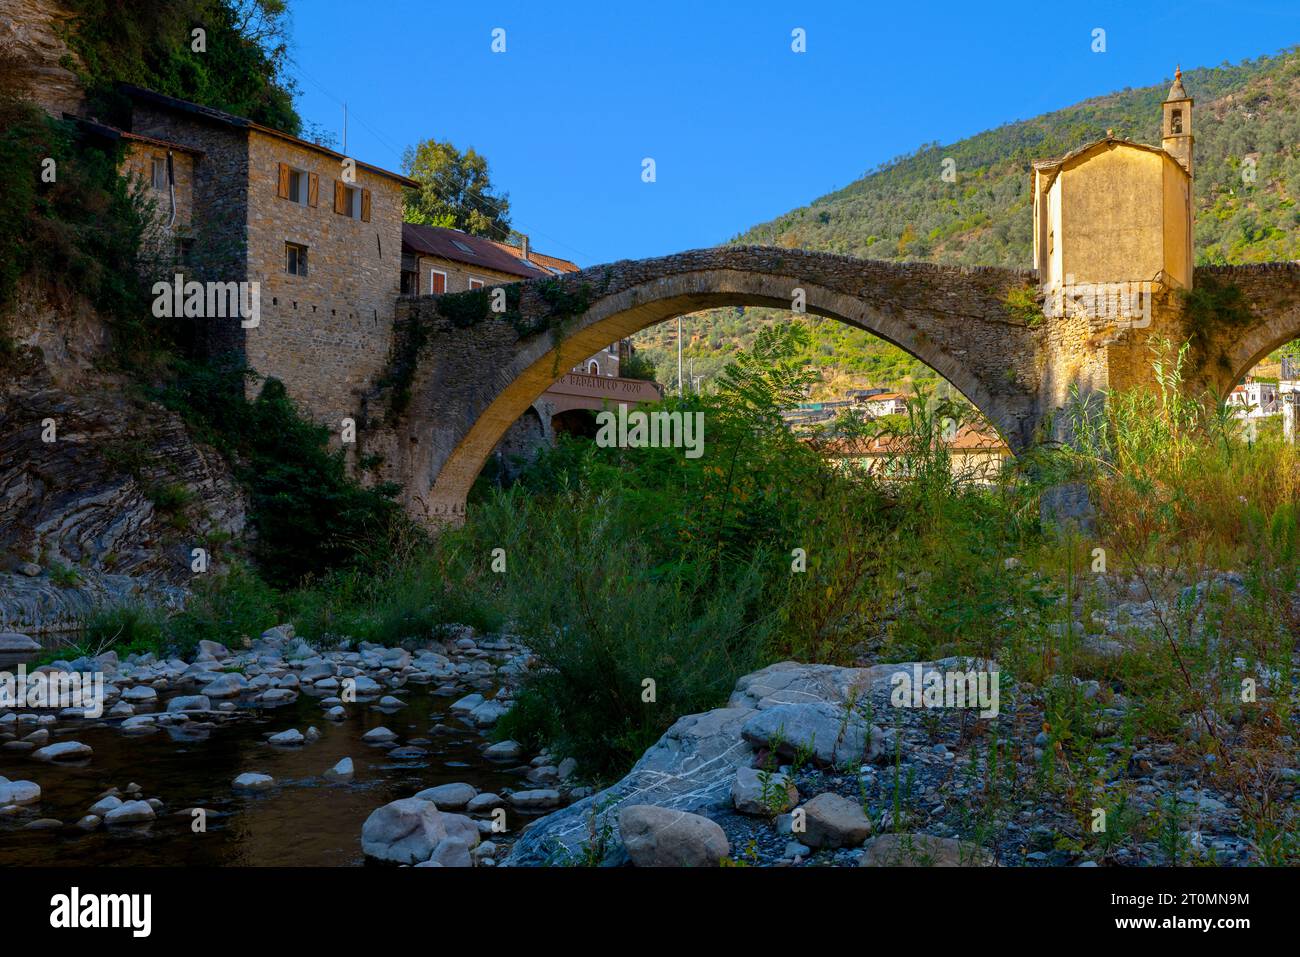 Medieval stone bridge over Argentina river and chapel in small town Badalucco. Badalucco is a comune in the Province of Imperia in Italy. Stock Photo